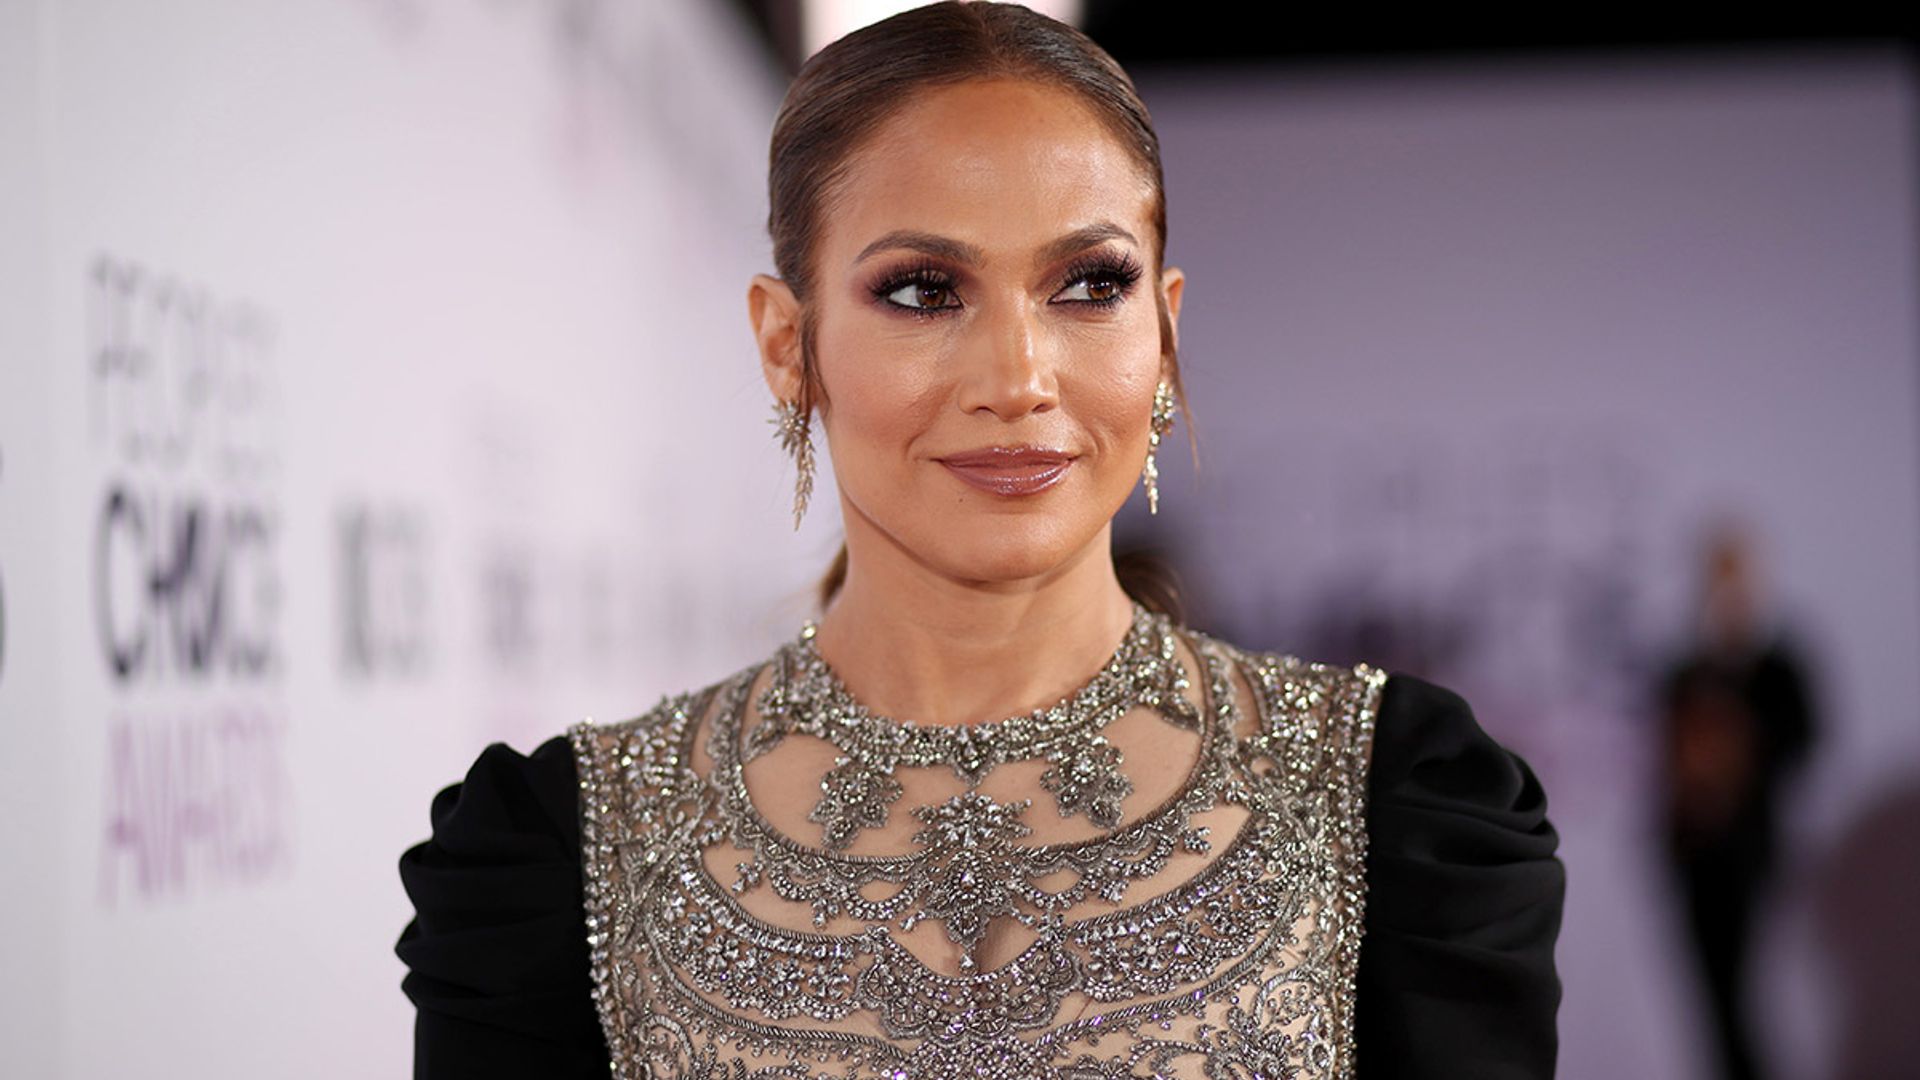 Jennifer Lopez shares incredibly rare photo of lookalike father – fans react